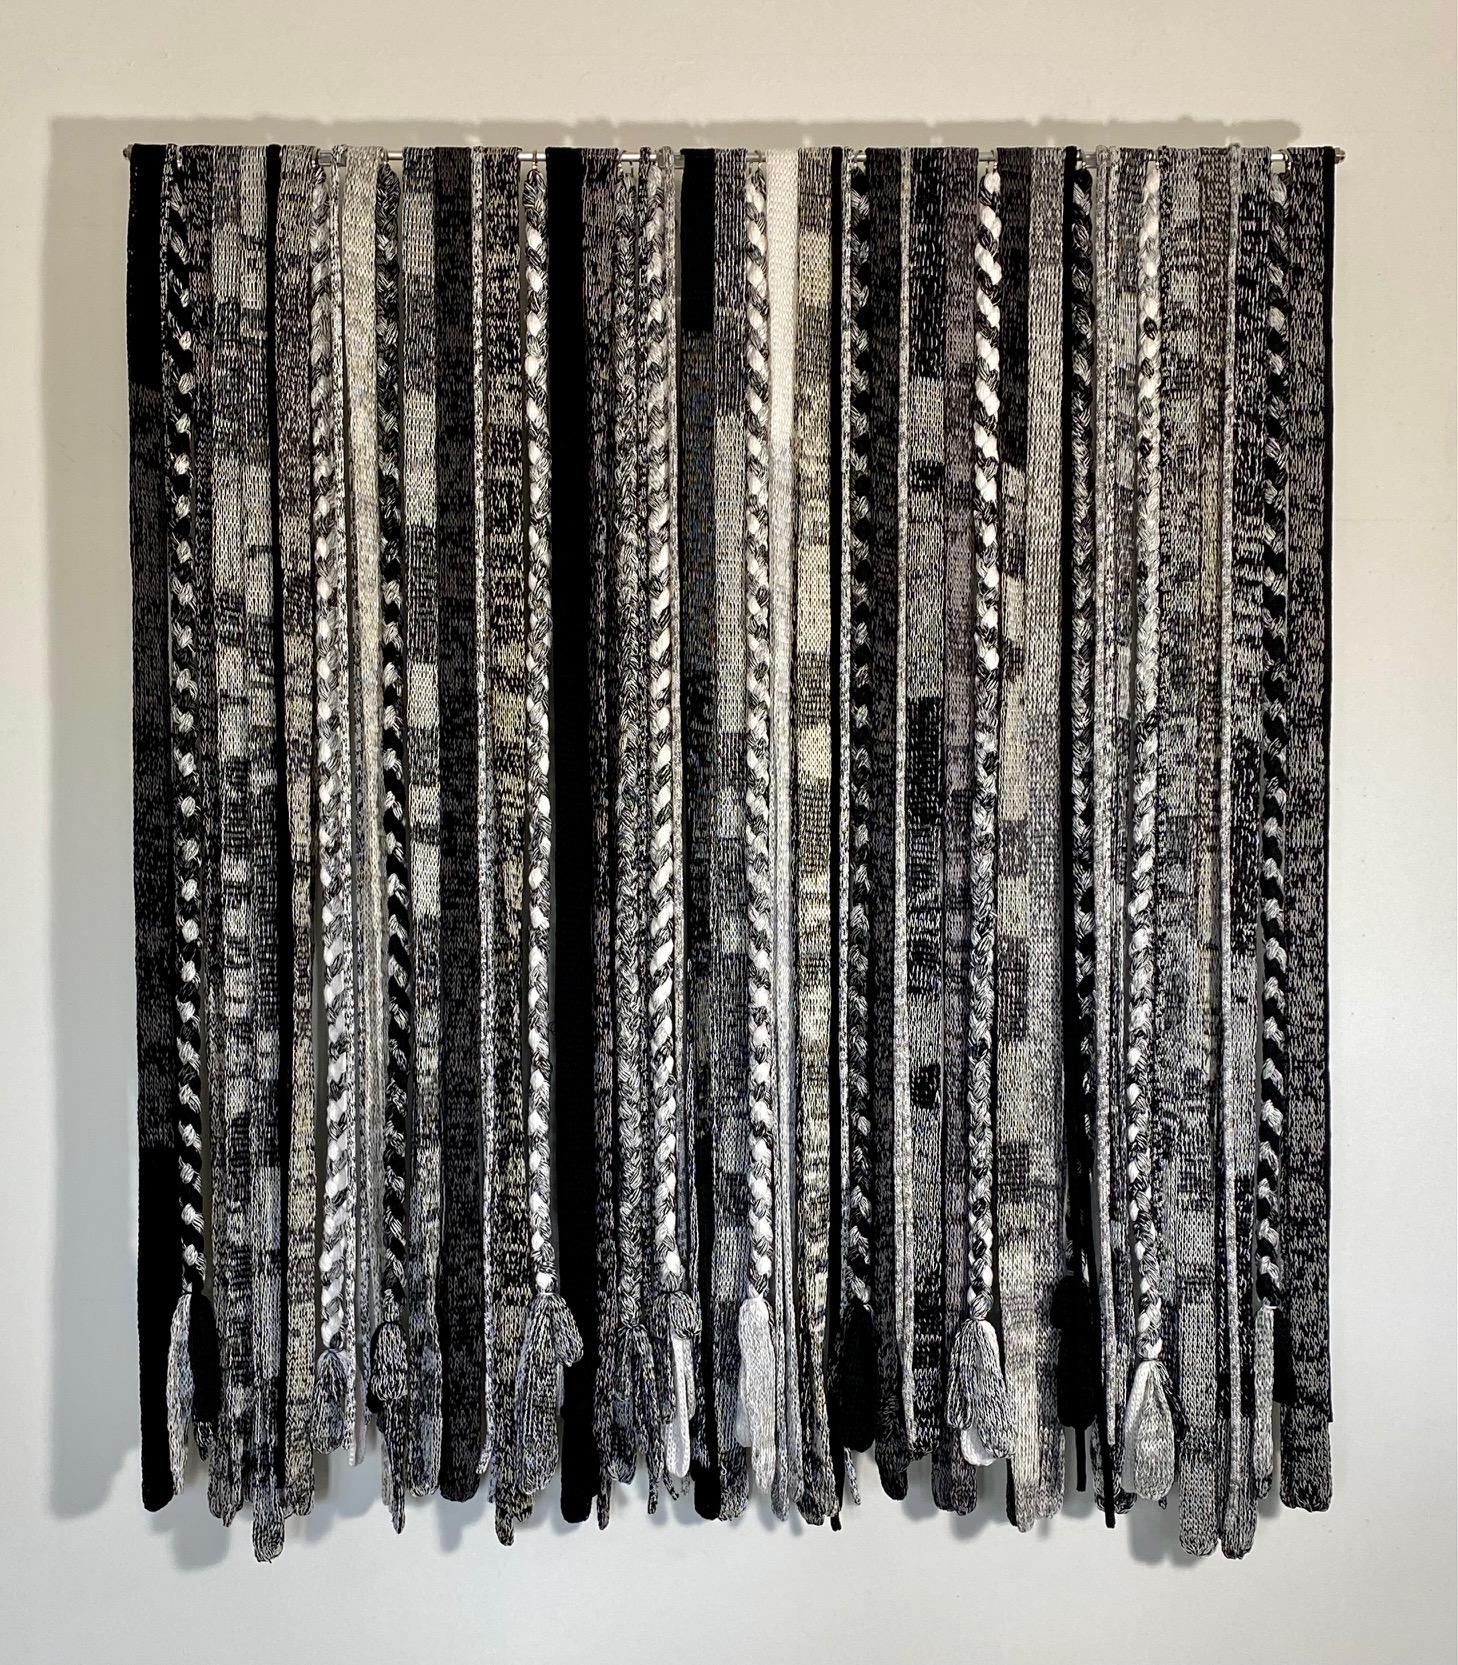 "Composition in Black and White", Cotton Wall Tapestry, Thread, Textile, Fiber - Sculpture by John Garrett